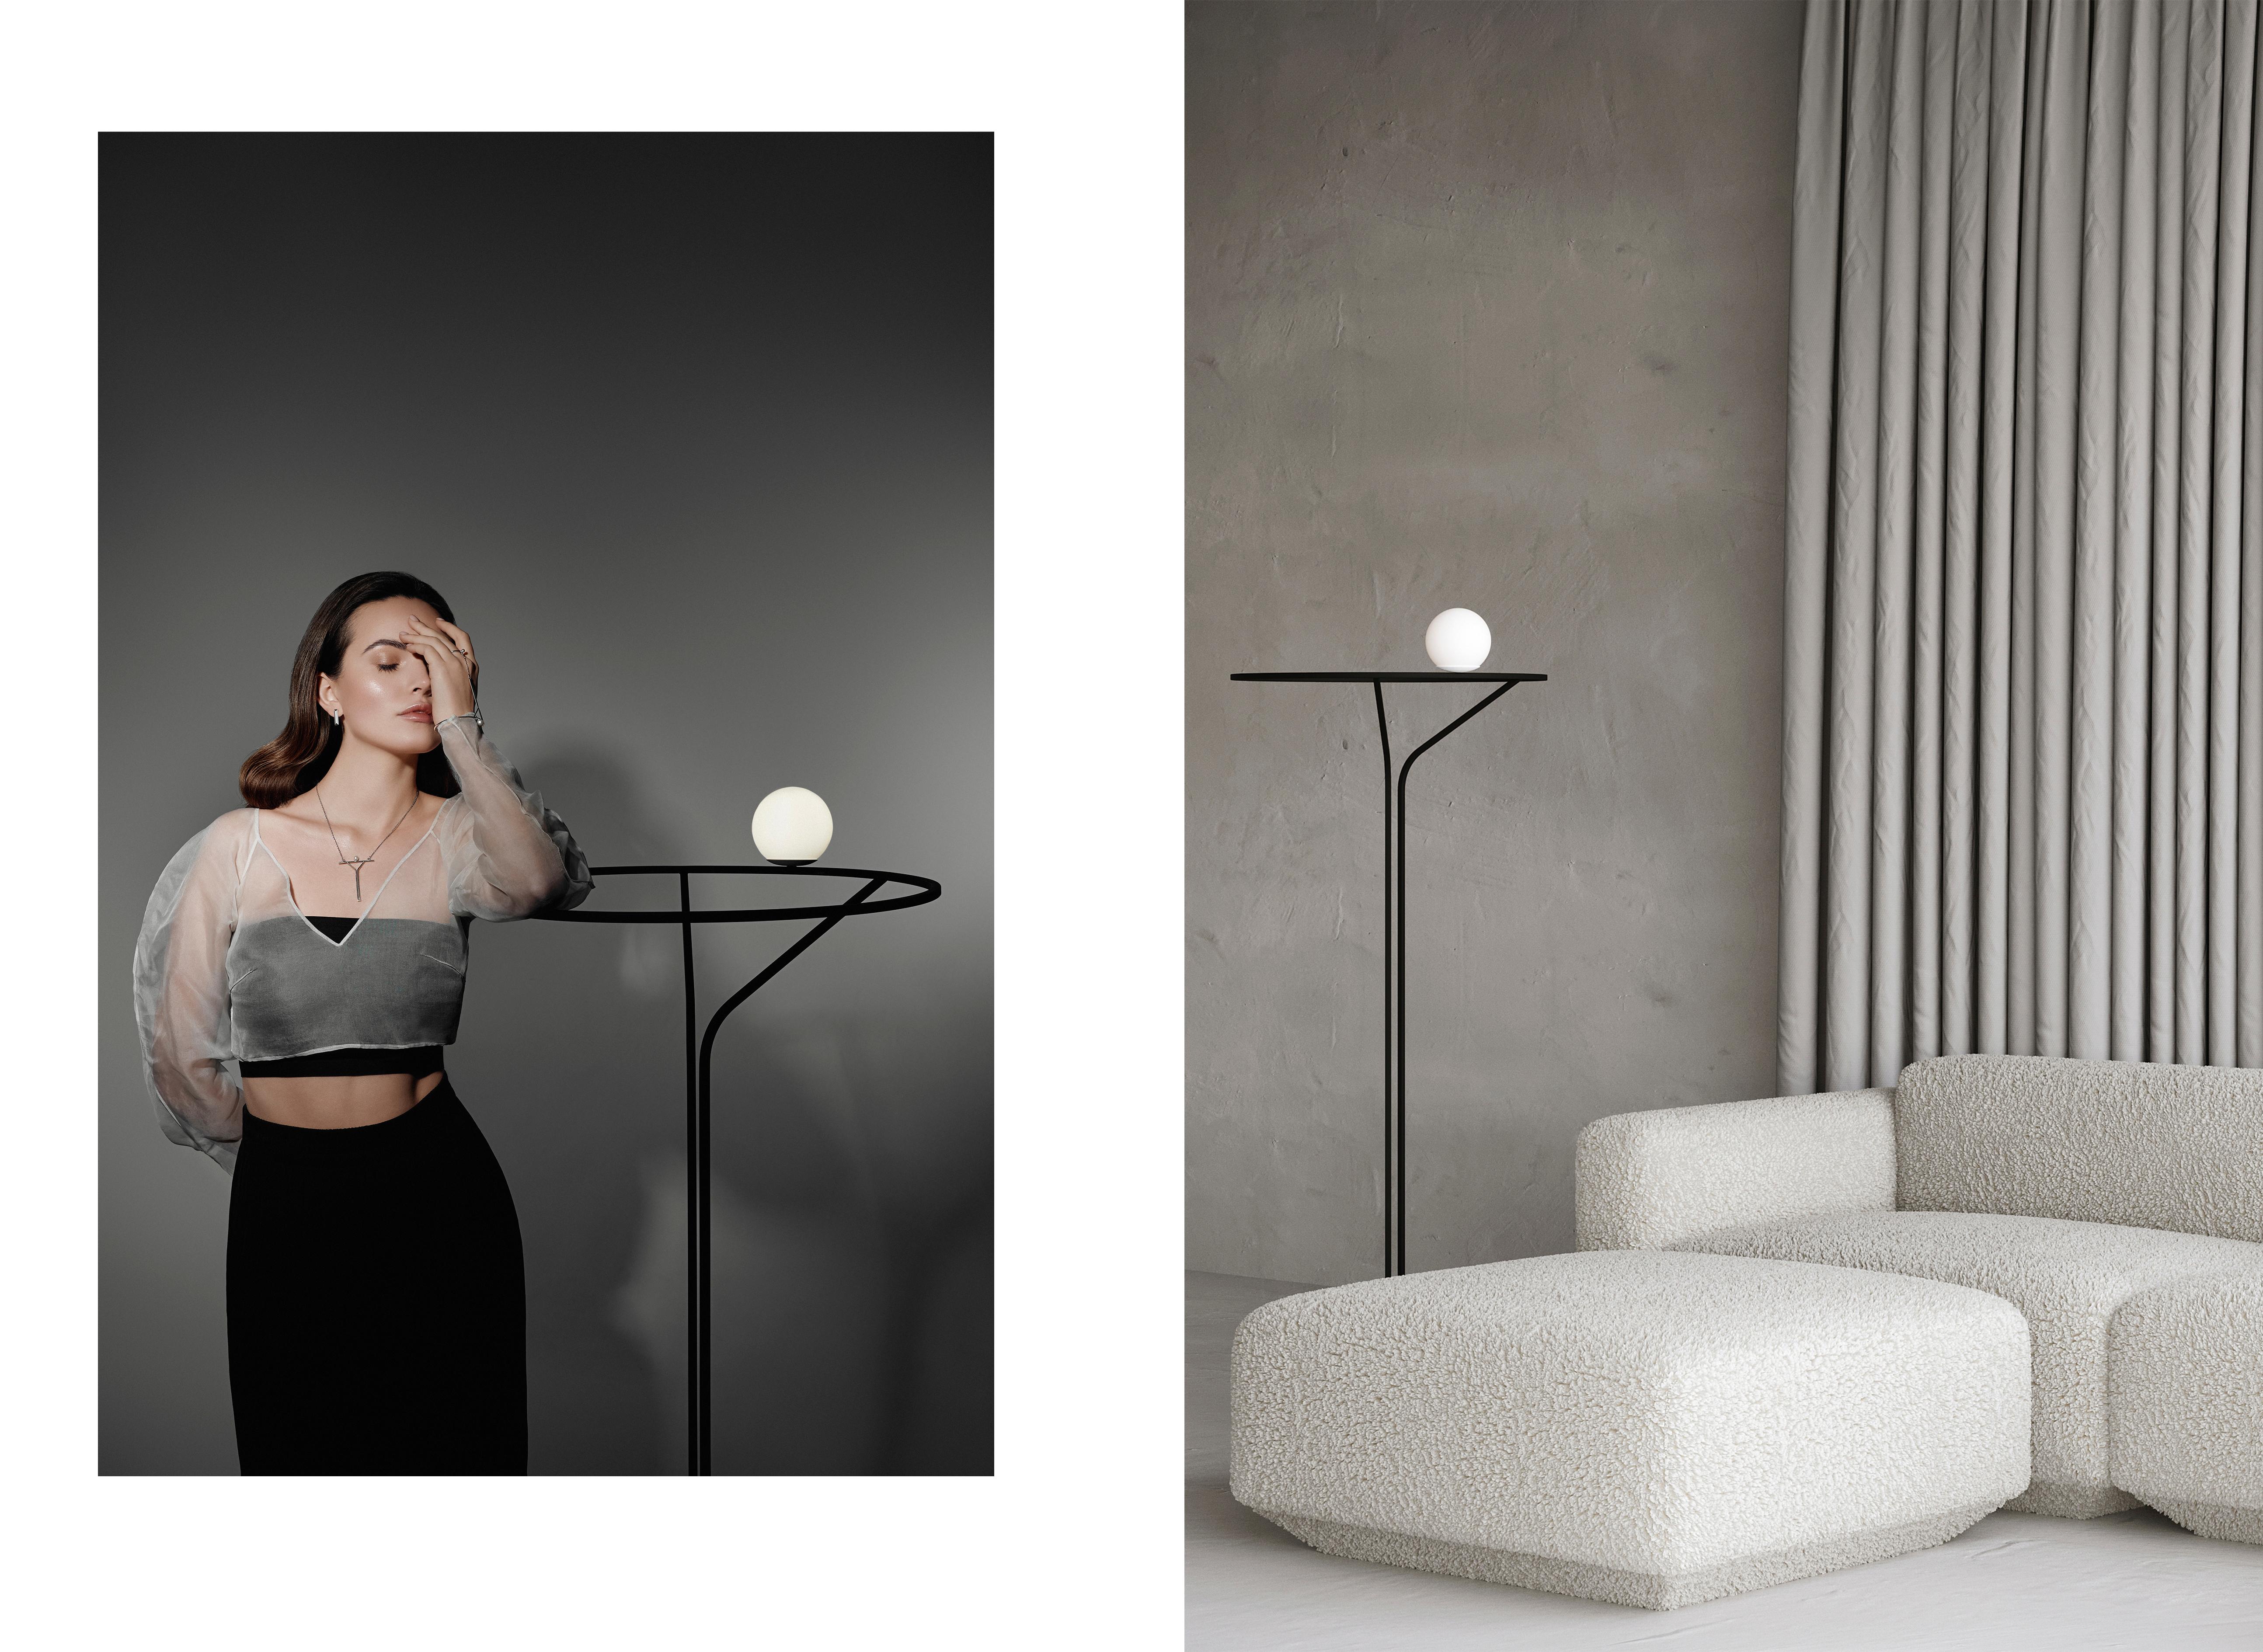 Na Linii lighting by SVITANOK

Category: Lighting
Type: Pendant, Floor lamp
Material: Steel rods, frosted glass, textile cable
Overall dimensions: 1450 x 550 mm
Light source: G9, 110-220V

US plug adapter included.
Available in different colors